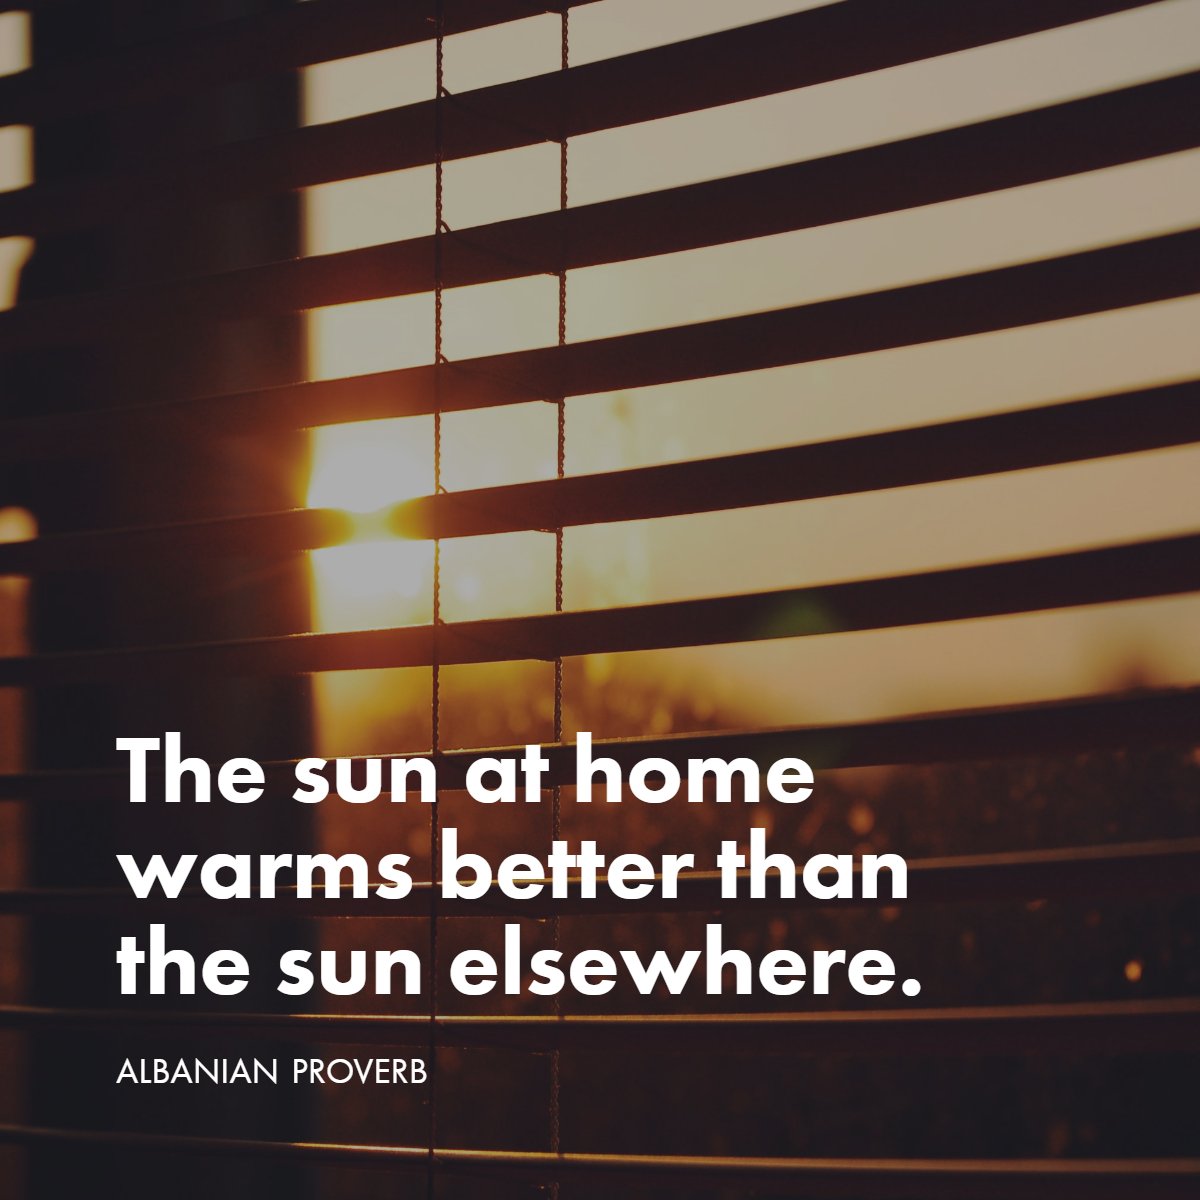 'The sun at home warms better than the sun elsewhere'
– Albanian Proverb 📖

#quoteoftheday #quotestagram #lifequotes #realestate #quotes #albanianproverb